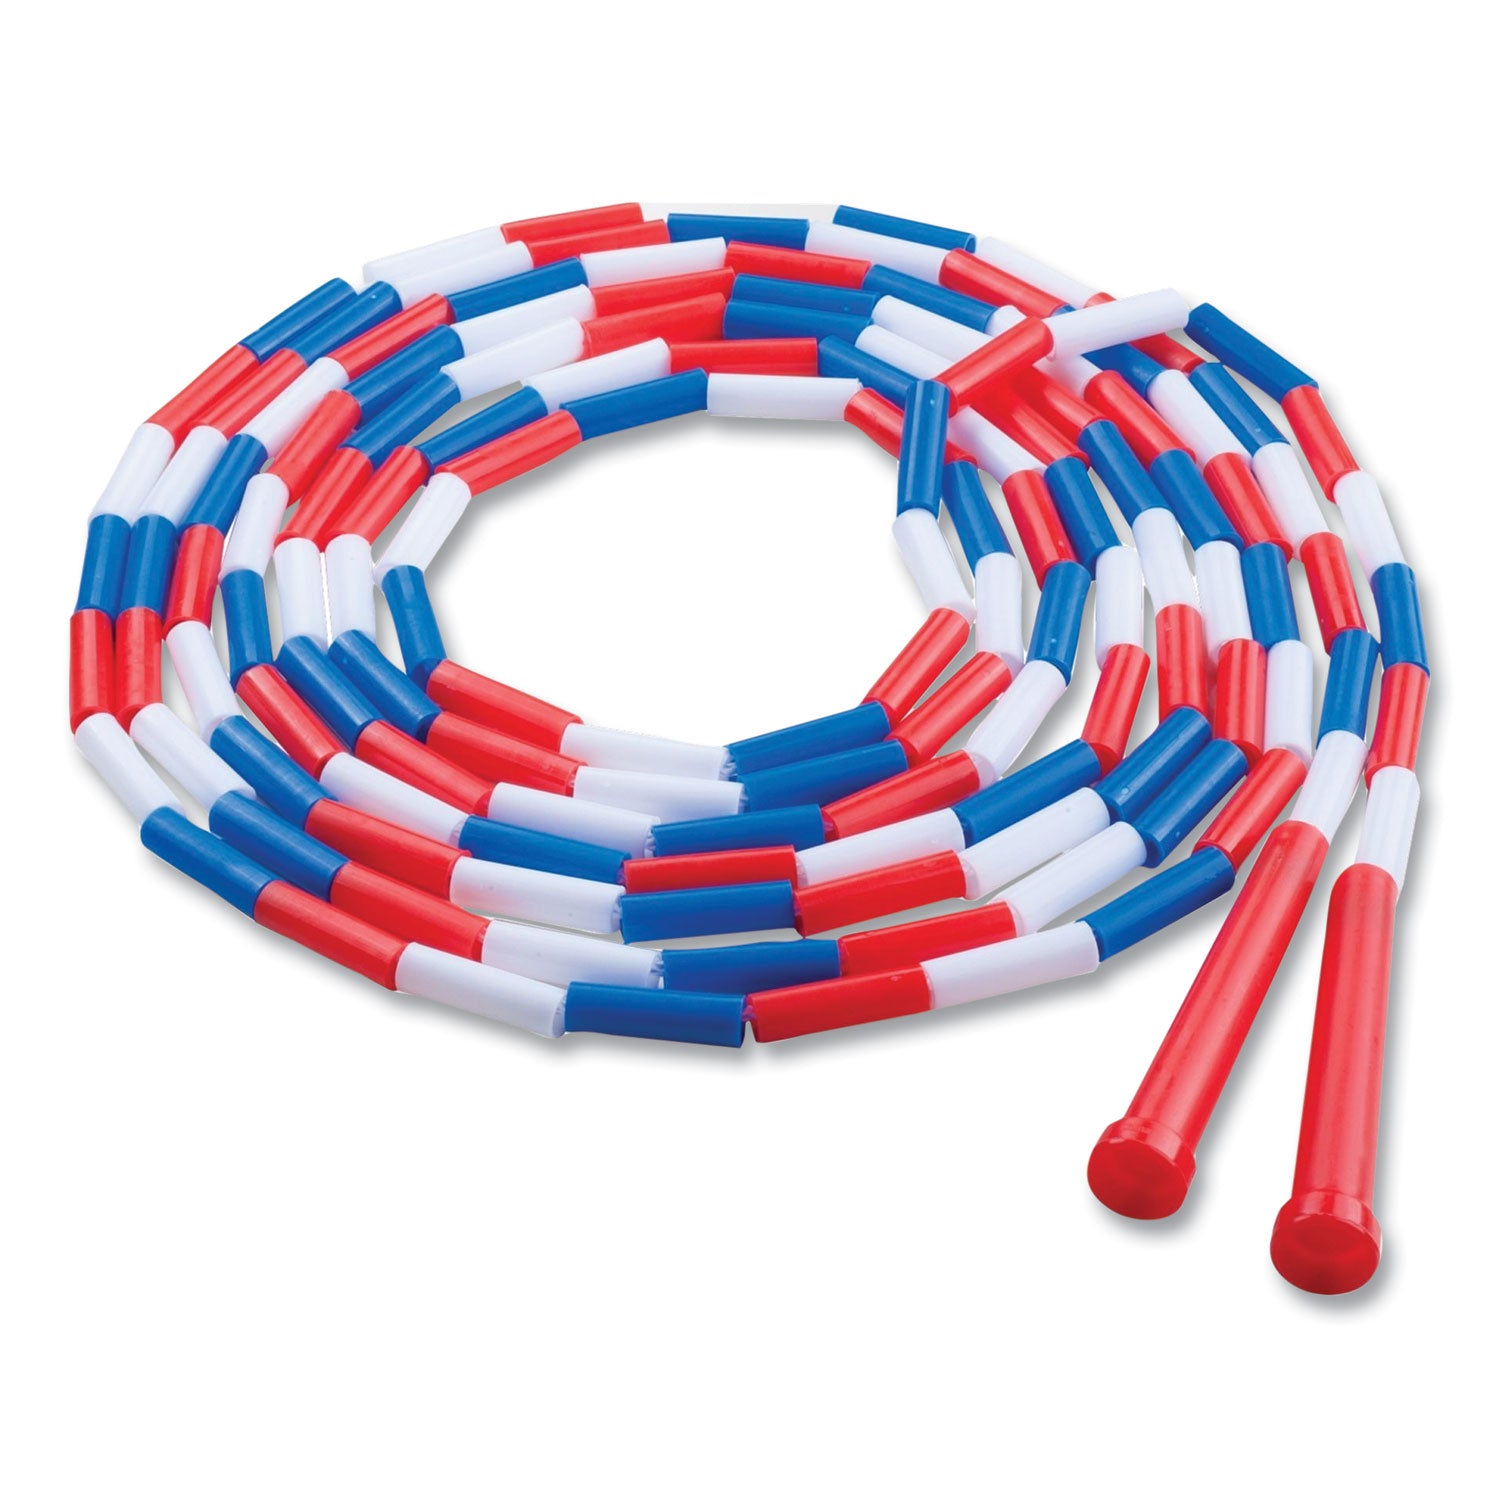 Segmented Plastic Jump Rope, 16 ft, Red/Blue/White - 